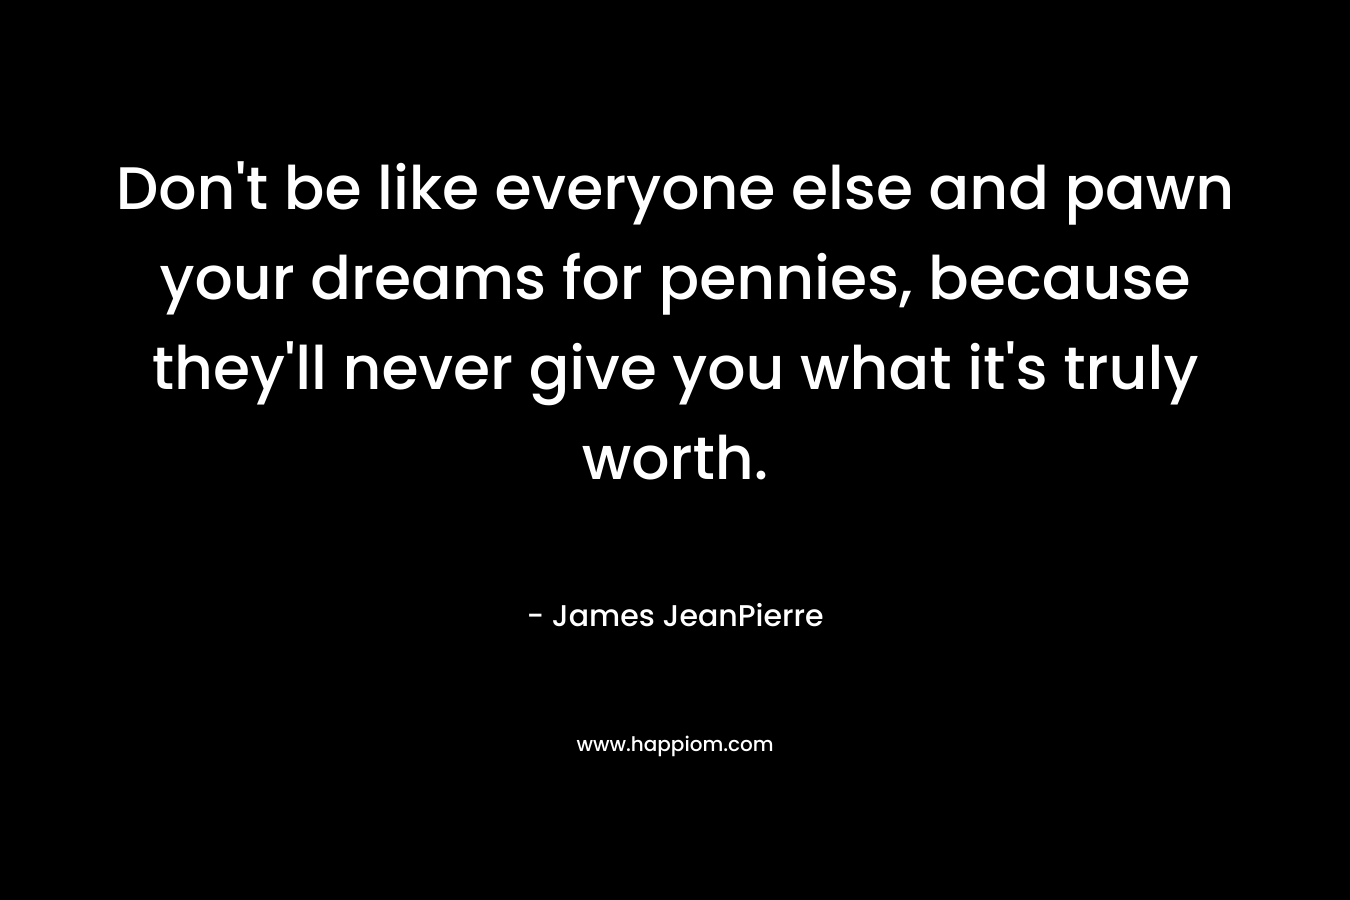 Don’t be like everyone else and pawn your dreams for pennies, because they’ll never give you what it’s truly worth. – James JeanPierre